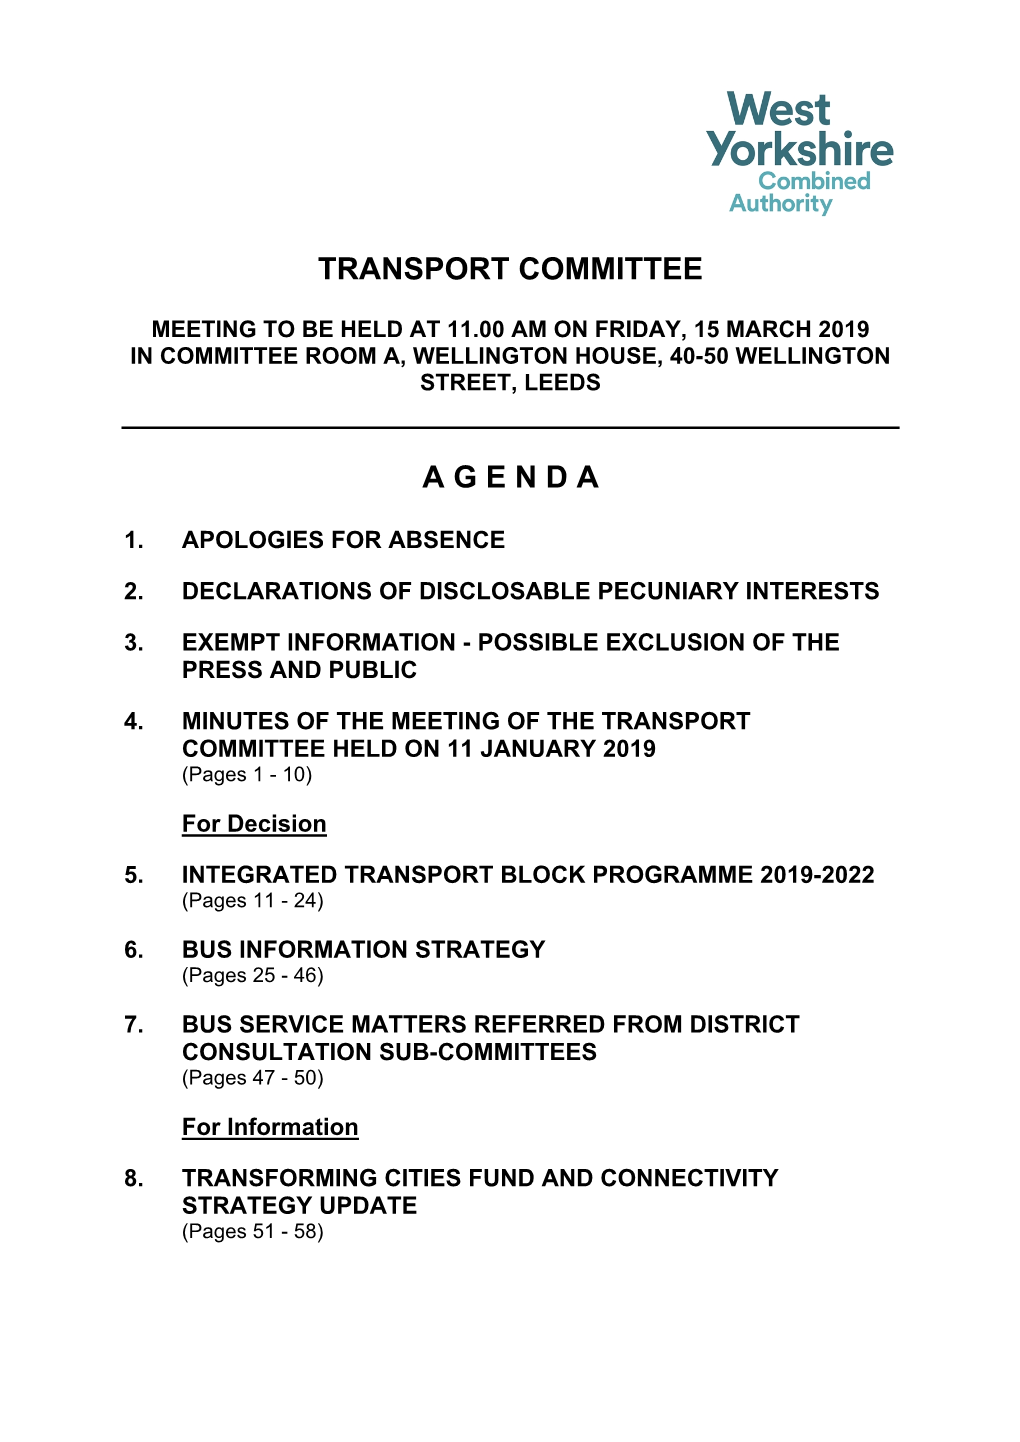 Transport Committee